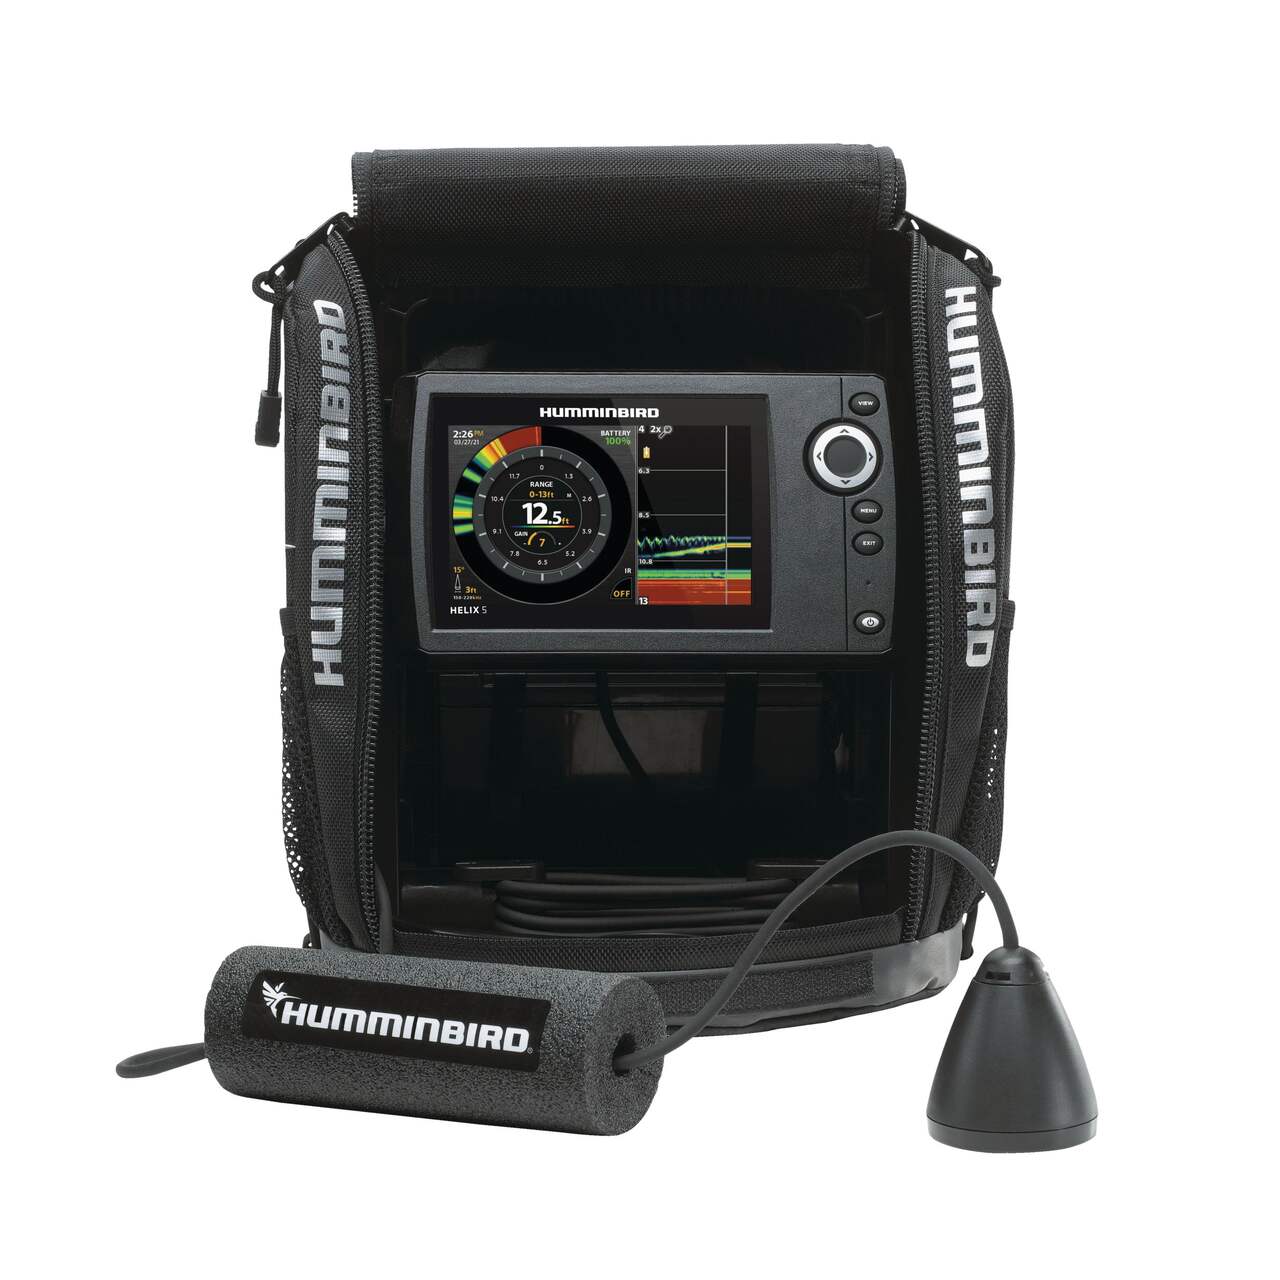 https://media-www.canadiantire.ca/product/playing/fishing/ice-fishing/0774526/humminbird-ice-helix-5-chirp-g3-234bd64e-ae24-49f4-8a67-95519463063a-jpgrendition.jpg?imdensity=1&imwidth=1244&impolicy=mZoom